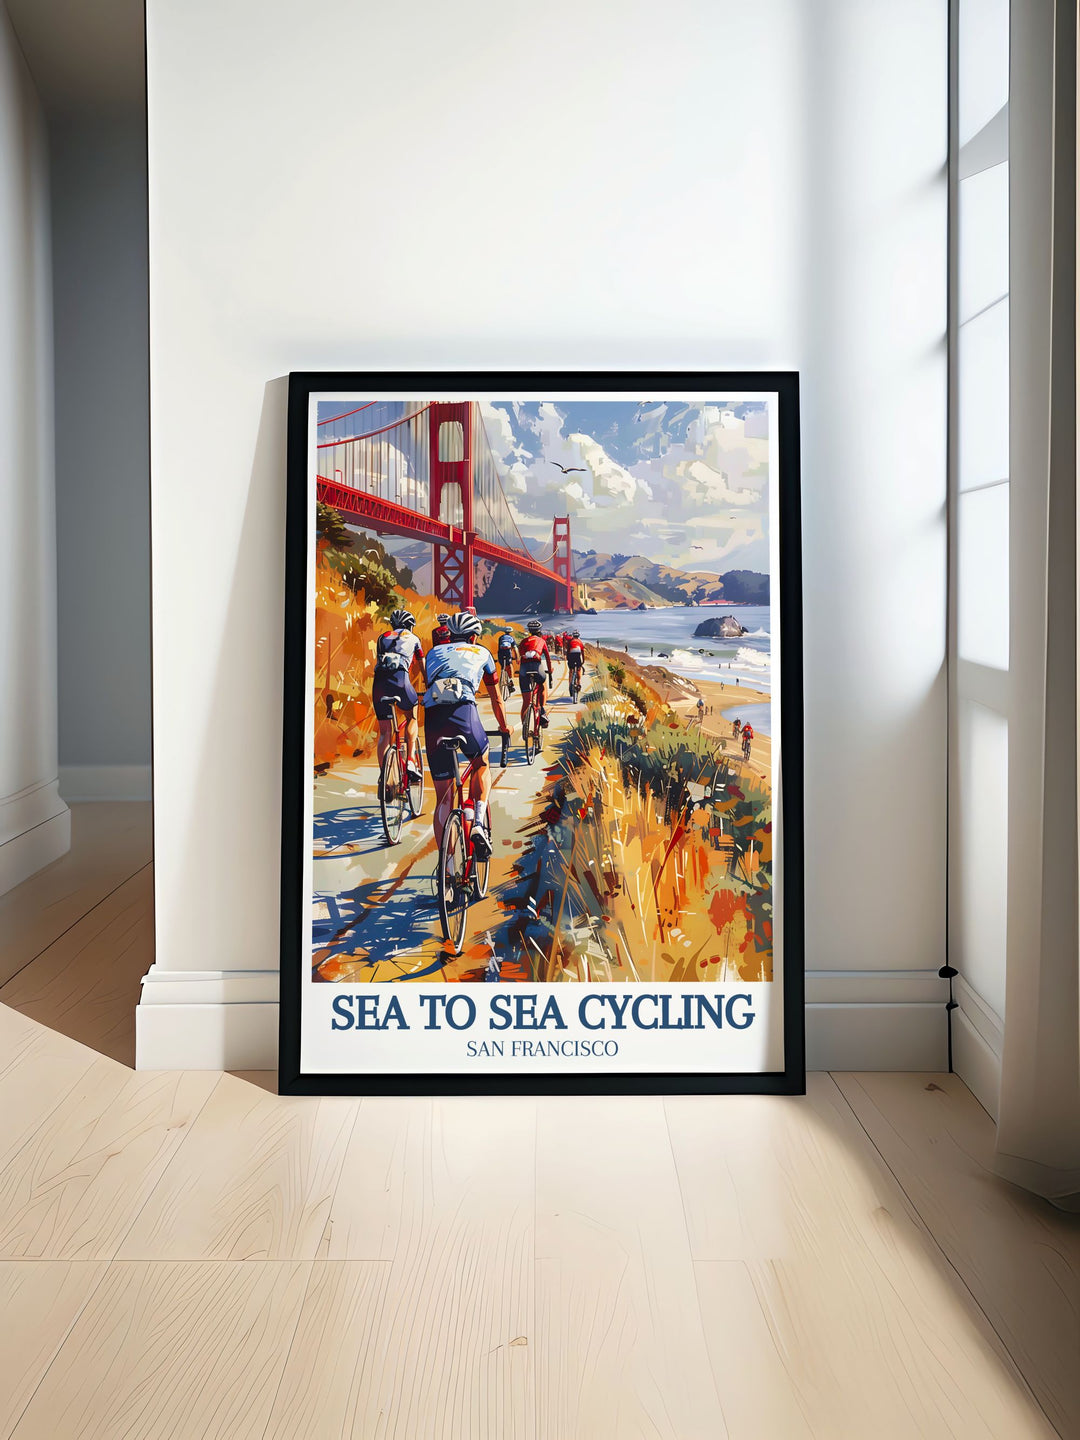 This vintage inspired poster of the Sea to Sea Cycling Route captures the breathtaking landscapes of England, from the Cliffs of Dover to the serene Lake District, perfect for your home decor and cycling art collection.